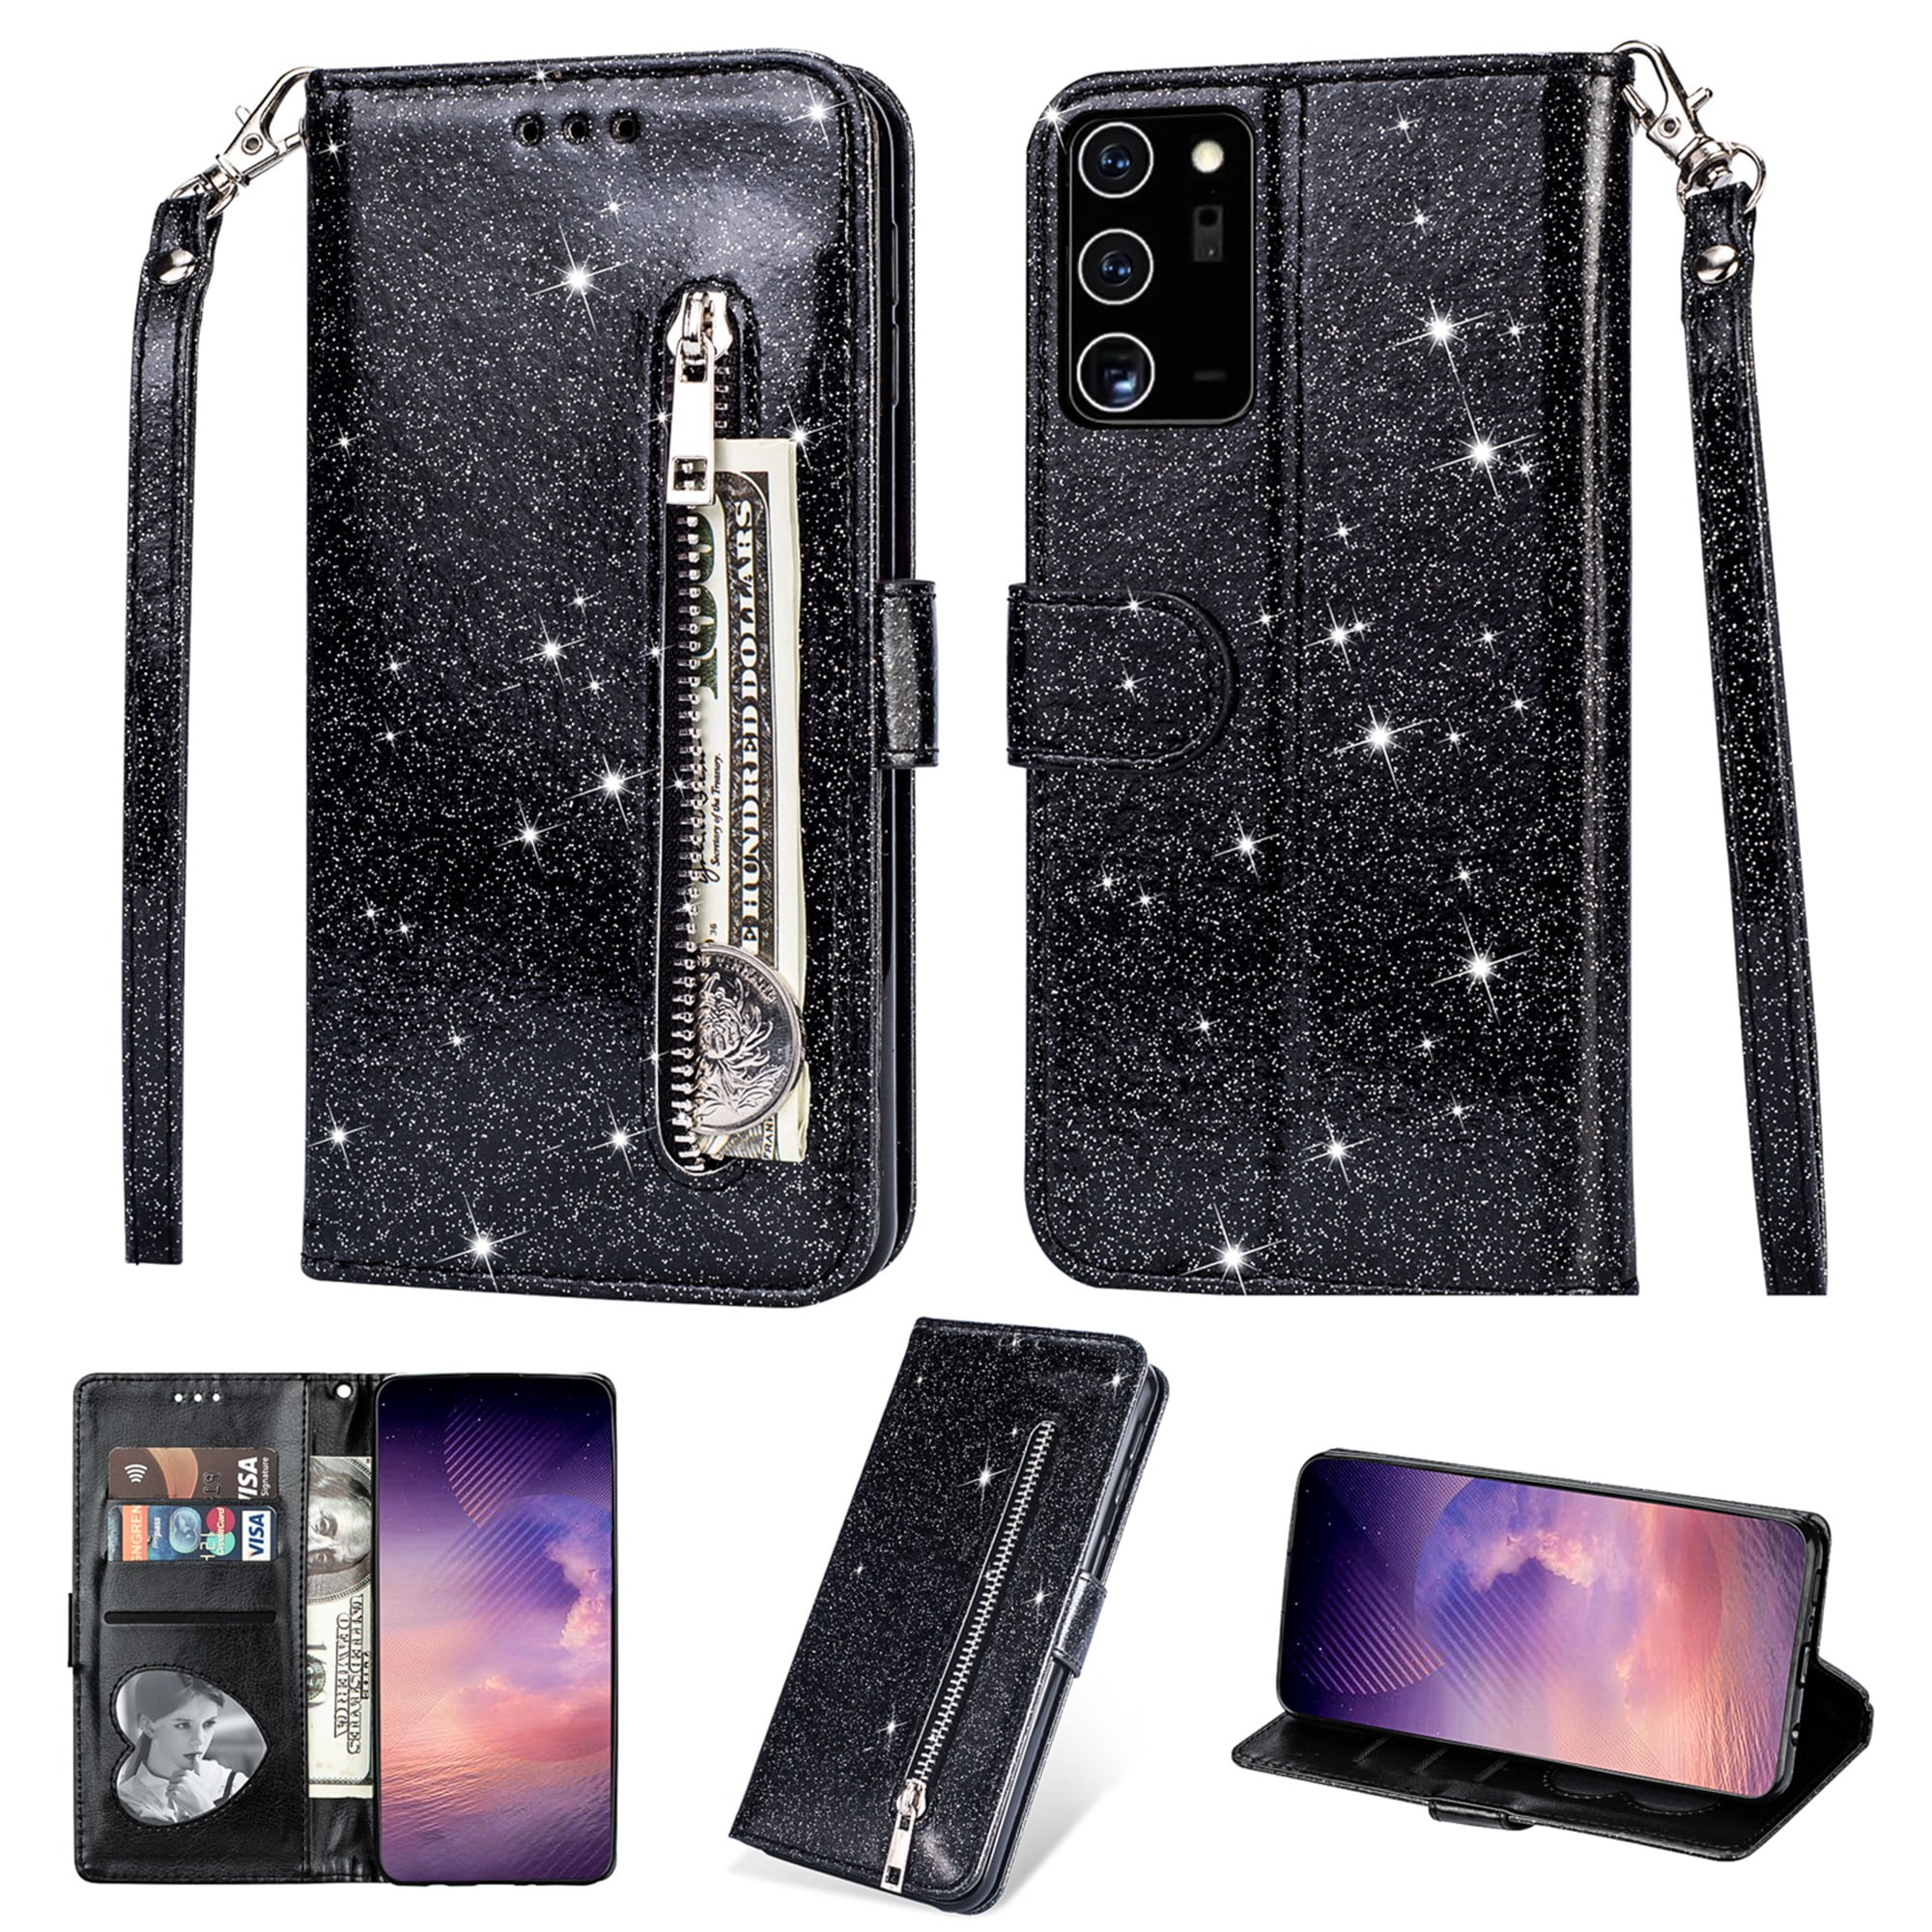 Stylish 2 Pack - Multicolor STENES Bling Wallet Case Compatible with Sony Xperia 1 3D Handmade Dreamcatcher Pearl Pendant Leather Cover with Ring Stand Holder 